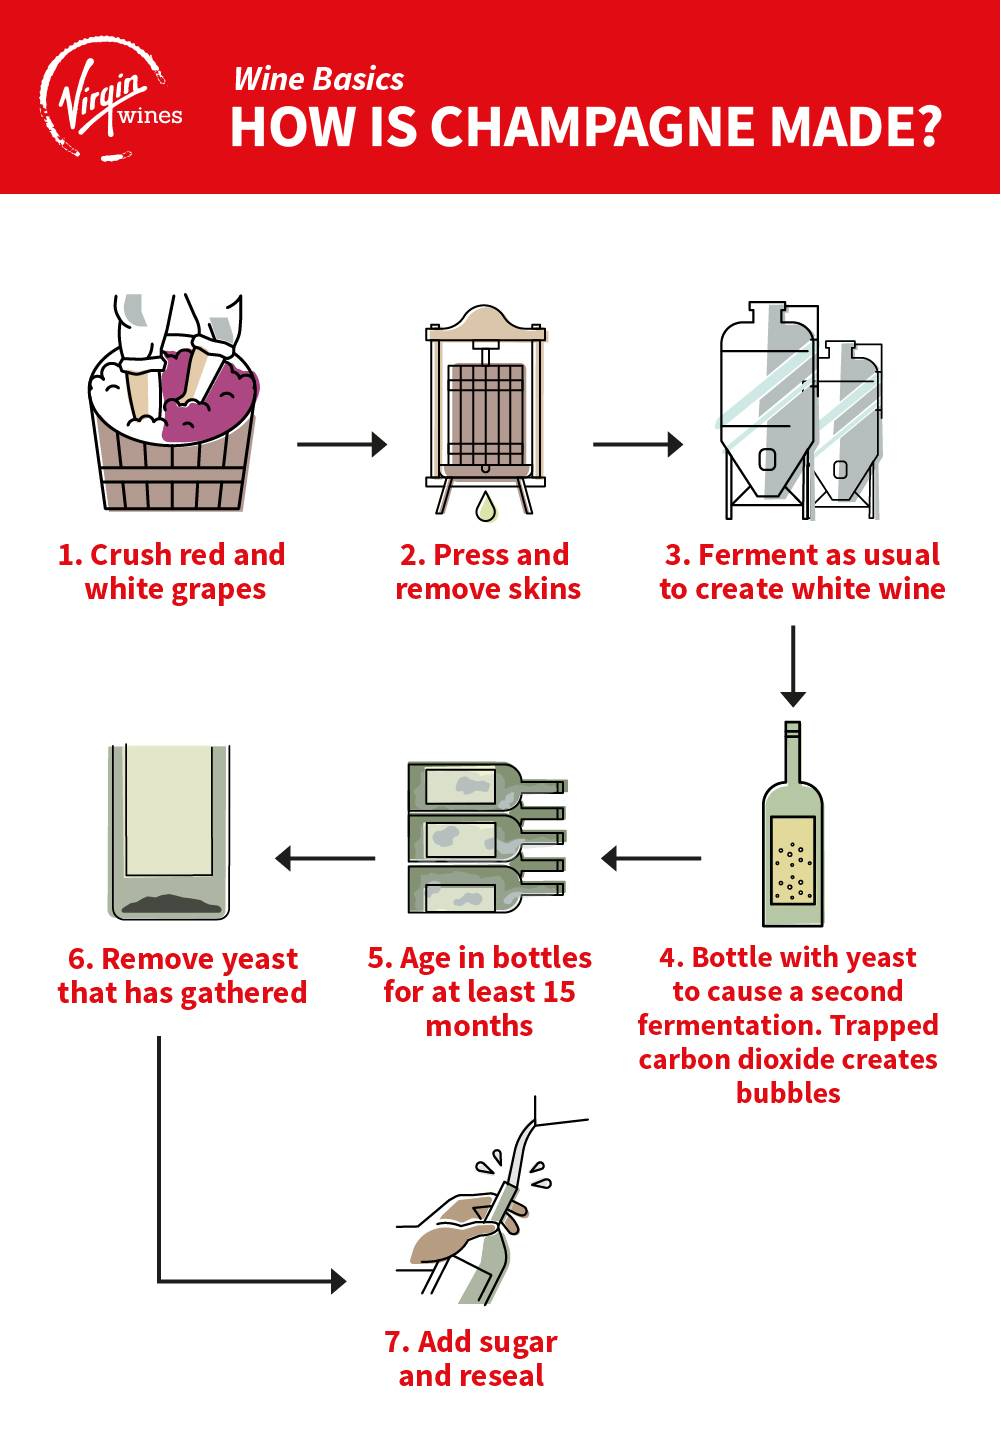 Infographic by Virgin Wines showing how Champagne is made